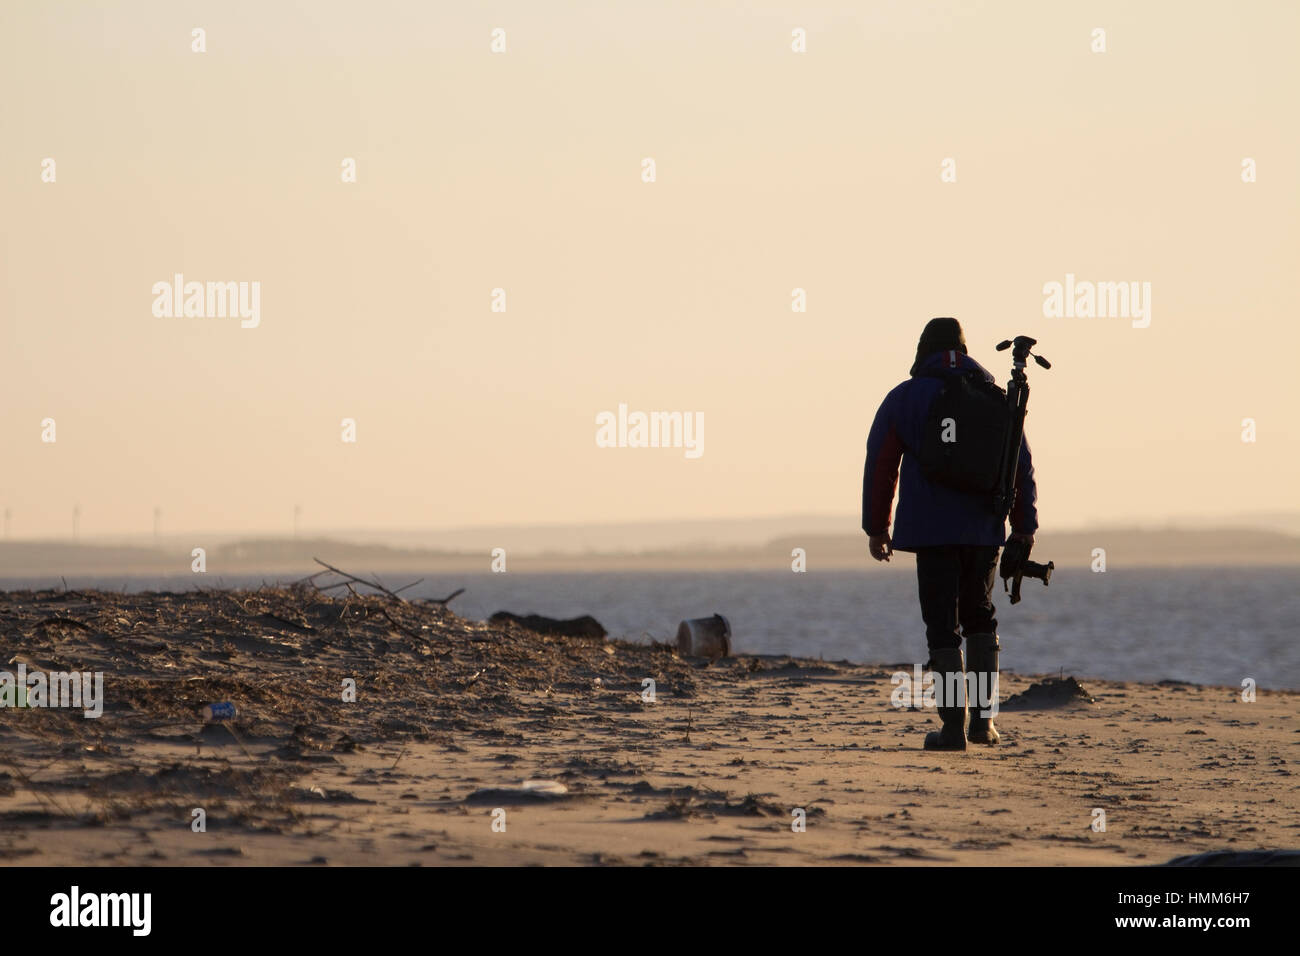 Silhouette of a photographer walking on the beach at Spurn Point, East Yorkshire, UK Stock Photo